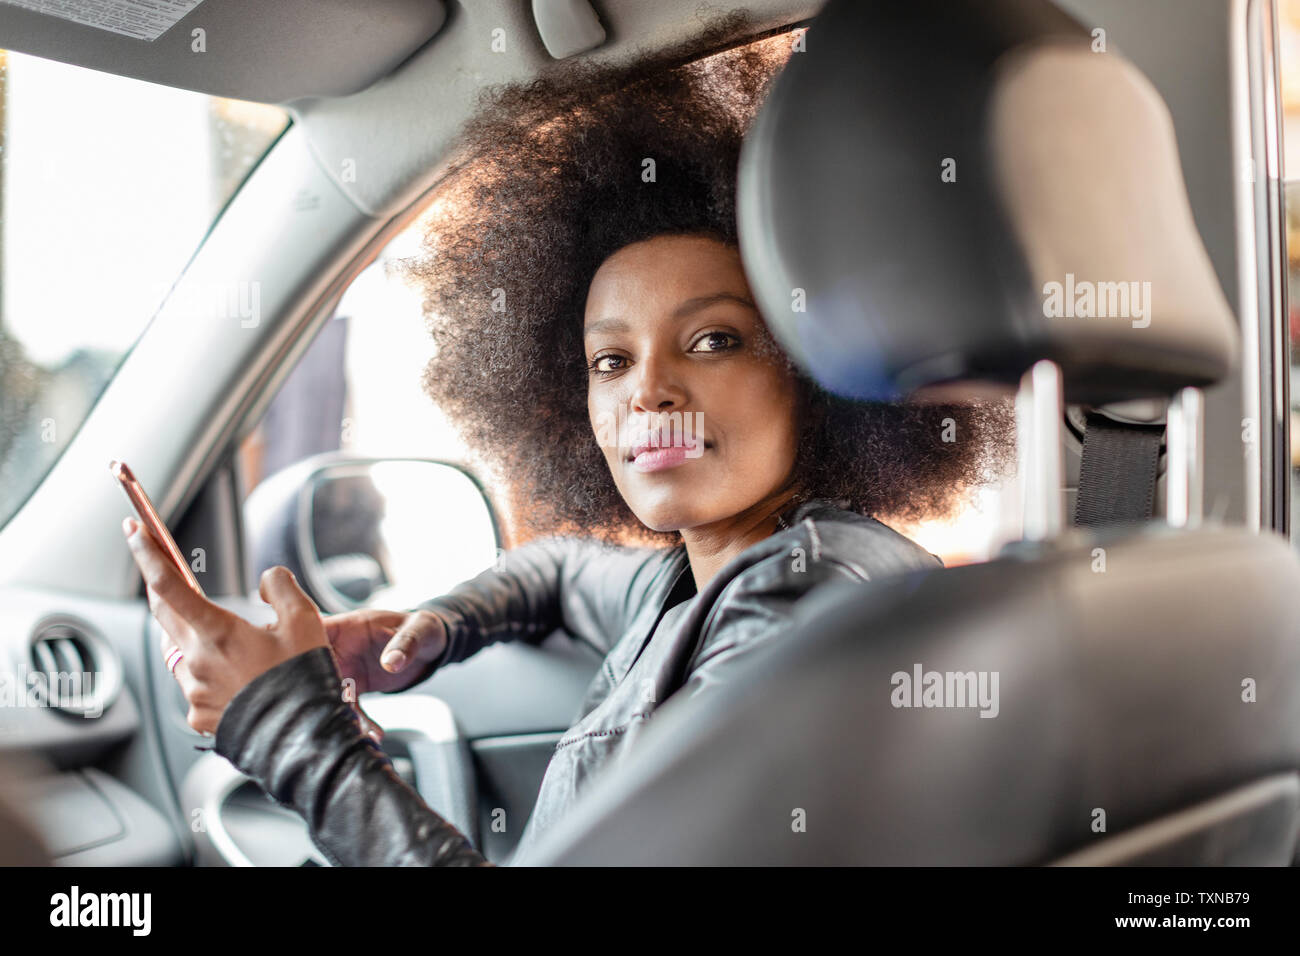 Young woman with afro hair in car passenger seat holding smartphone, portrait Stock Photo